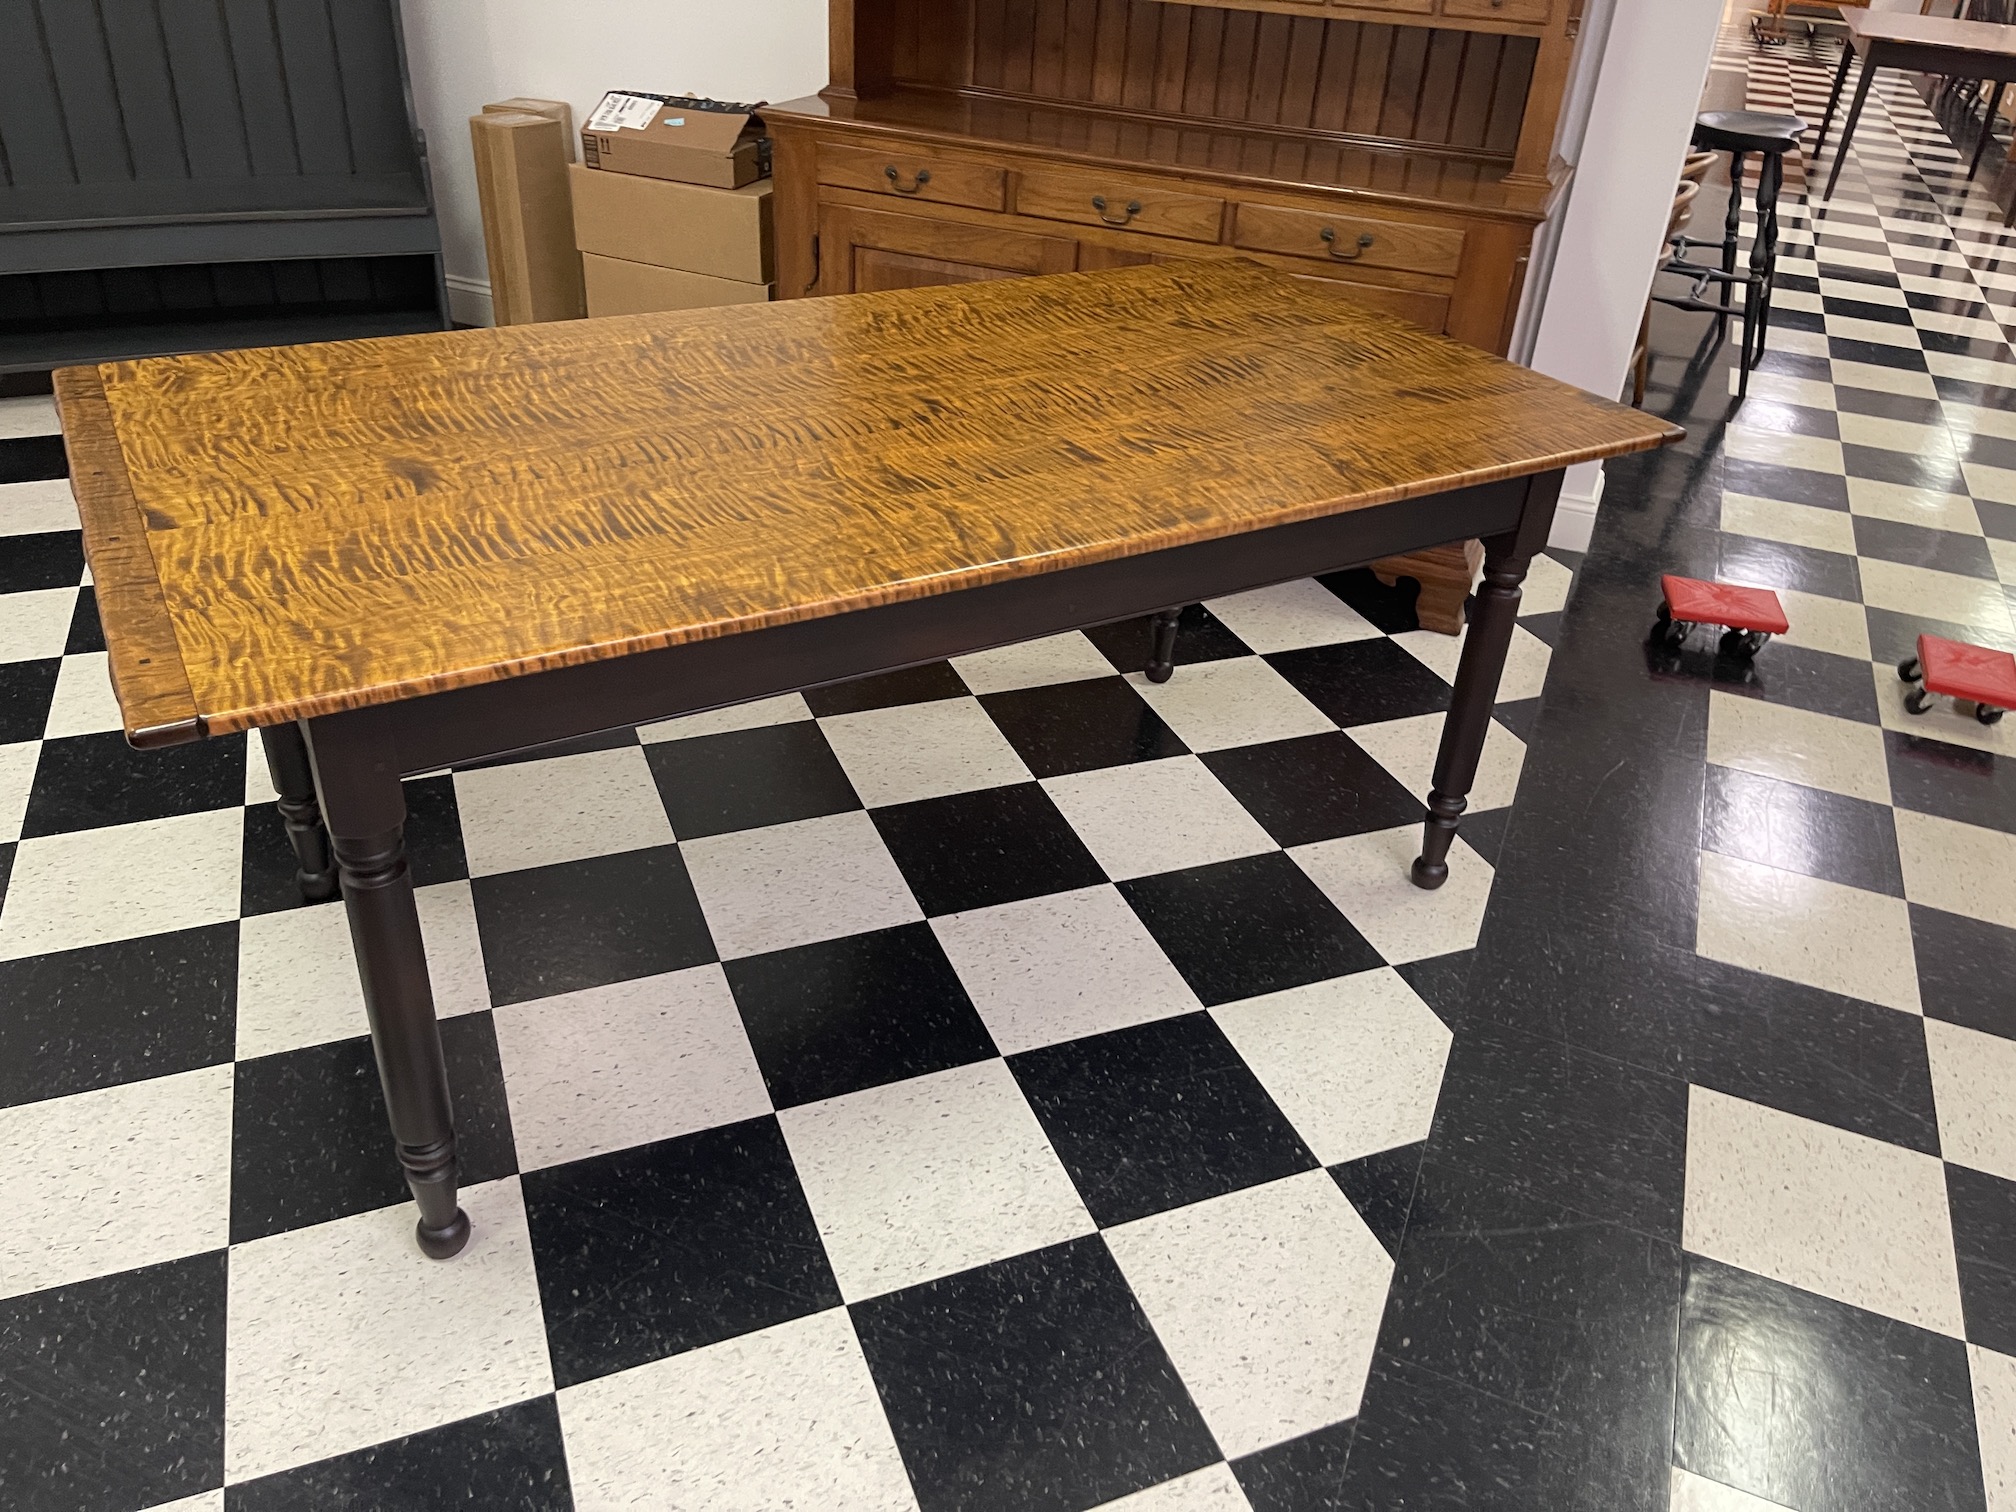 6ft X 37in Pennsylvania Turned Leg Farm Table - Tiger Maple Top - Antique Black over Red Base Image